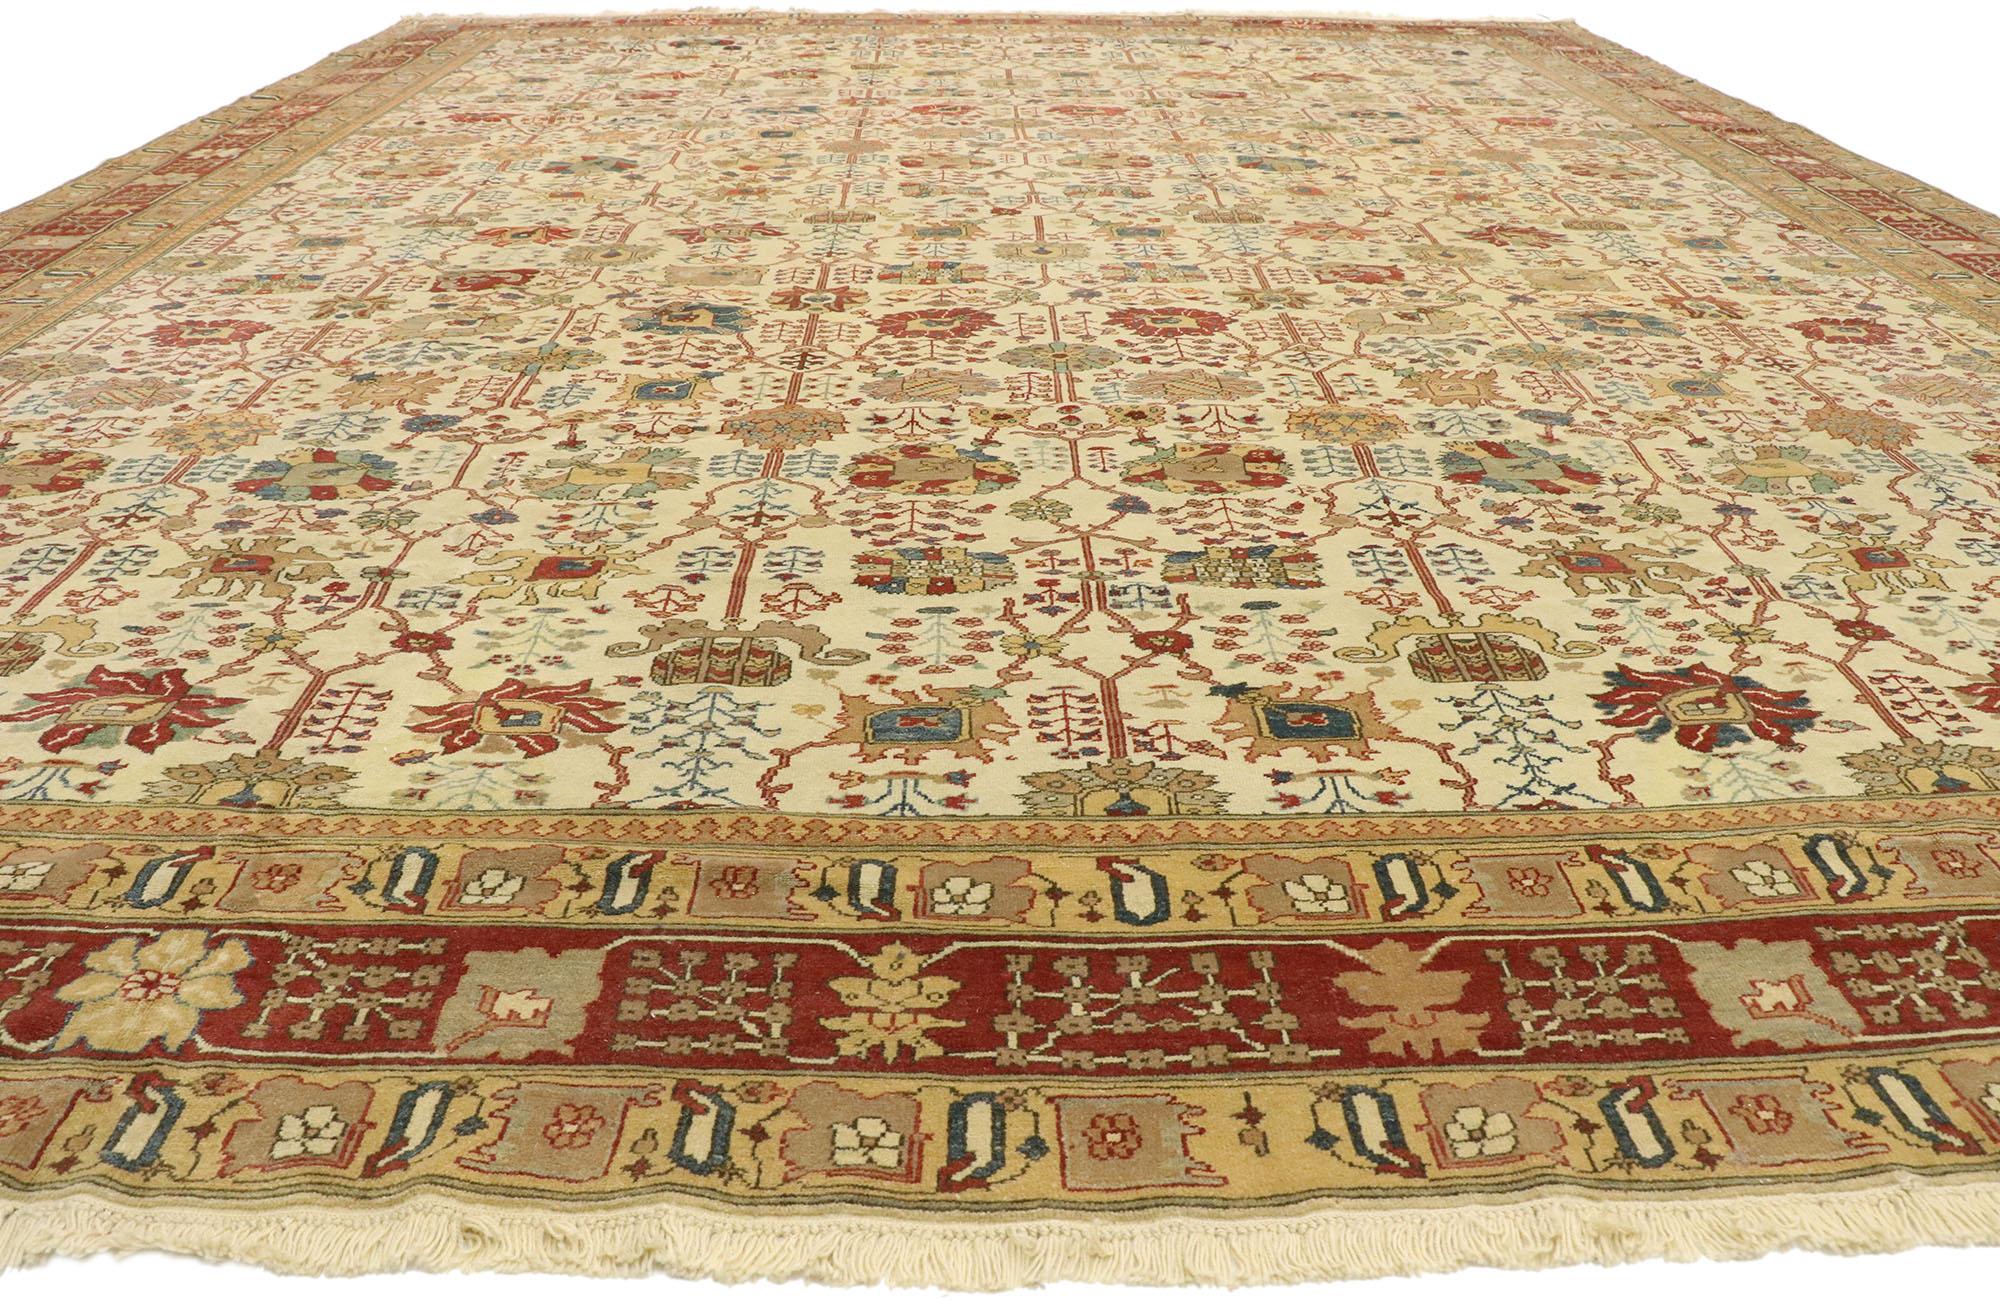 Oushak Vintage Turkish Rug with Arts & Crafts Style Inspired by William Morris